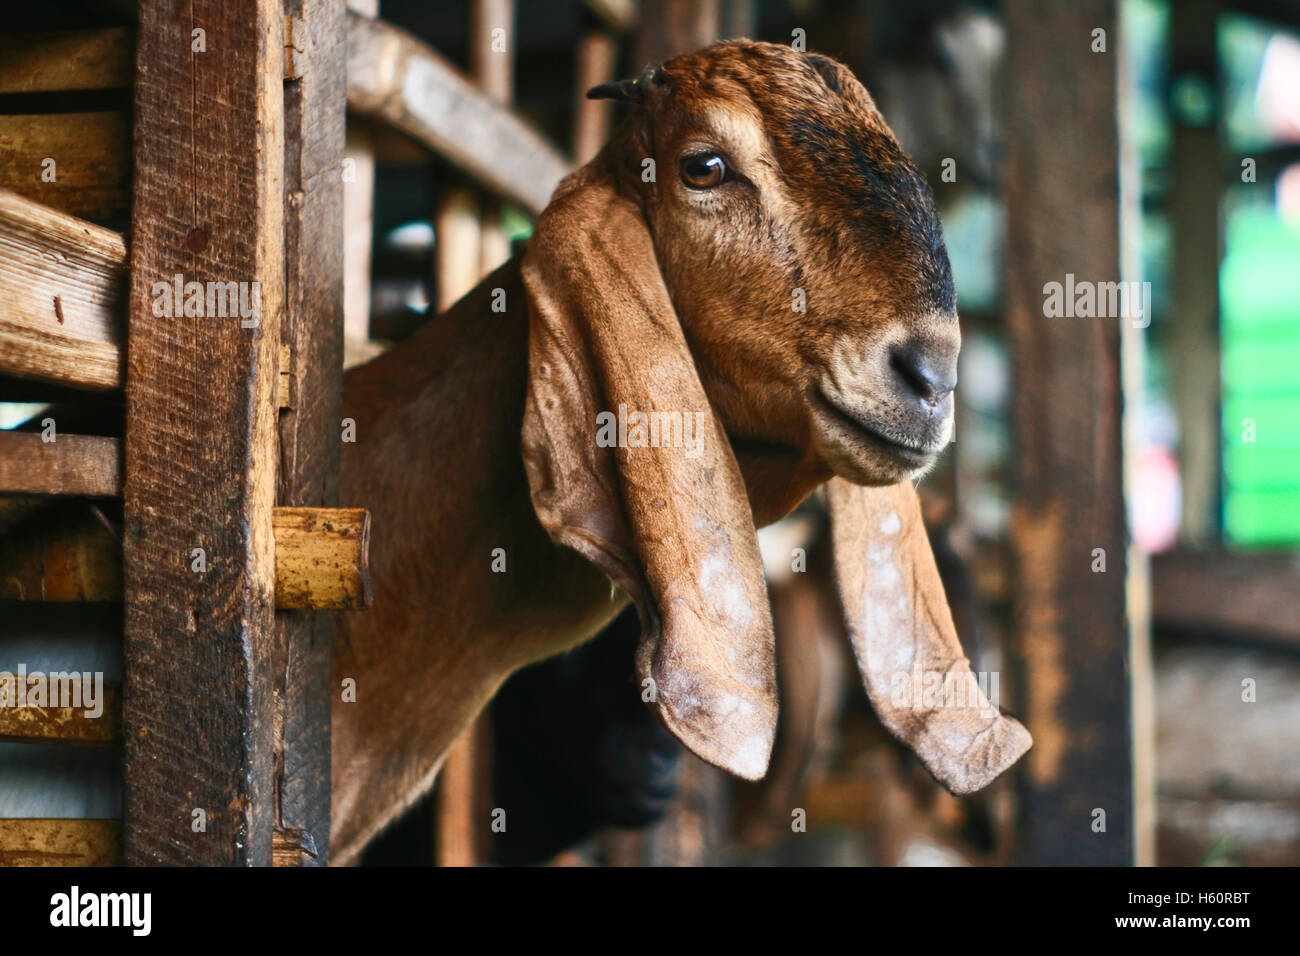 Goat head in the cage Stock Photo